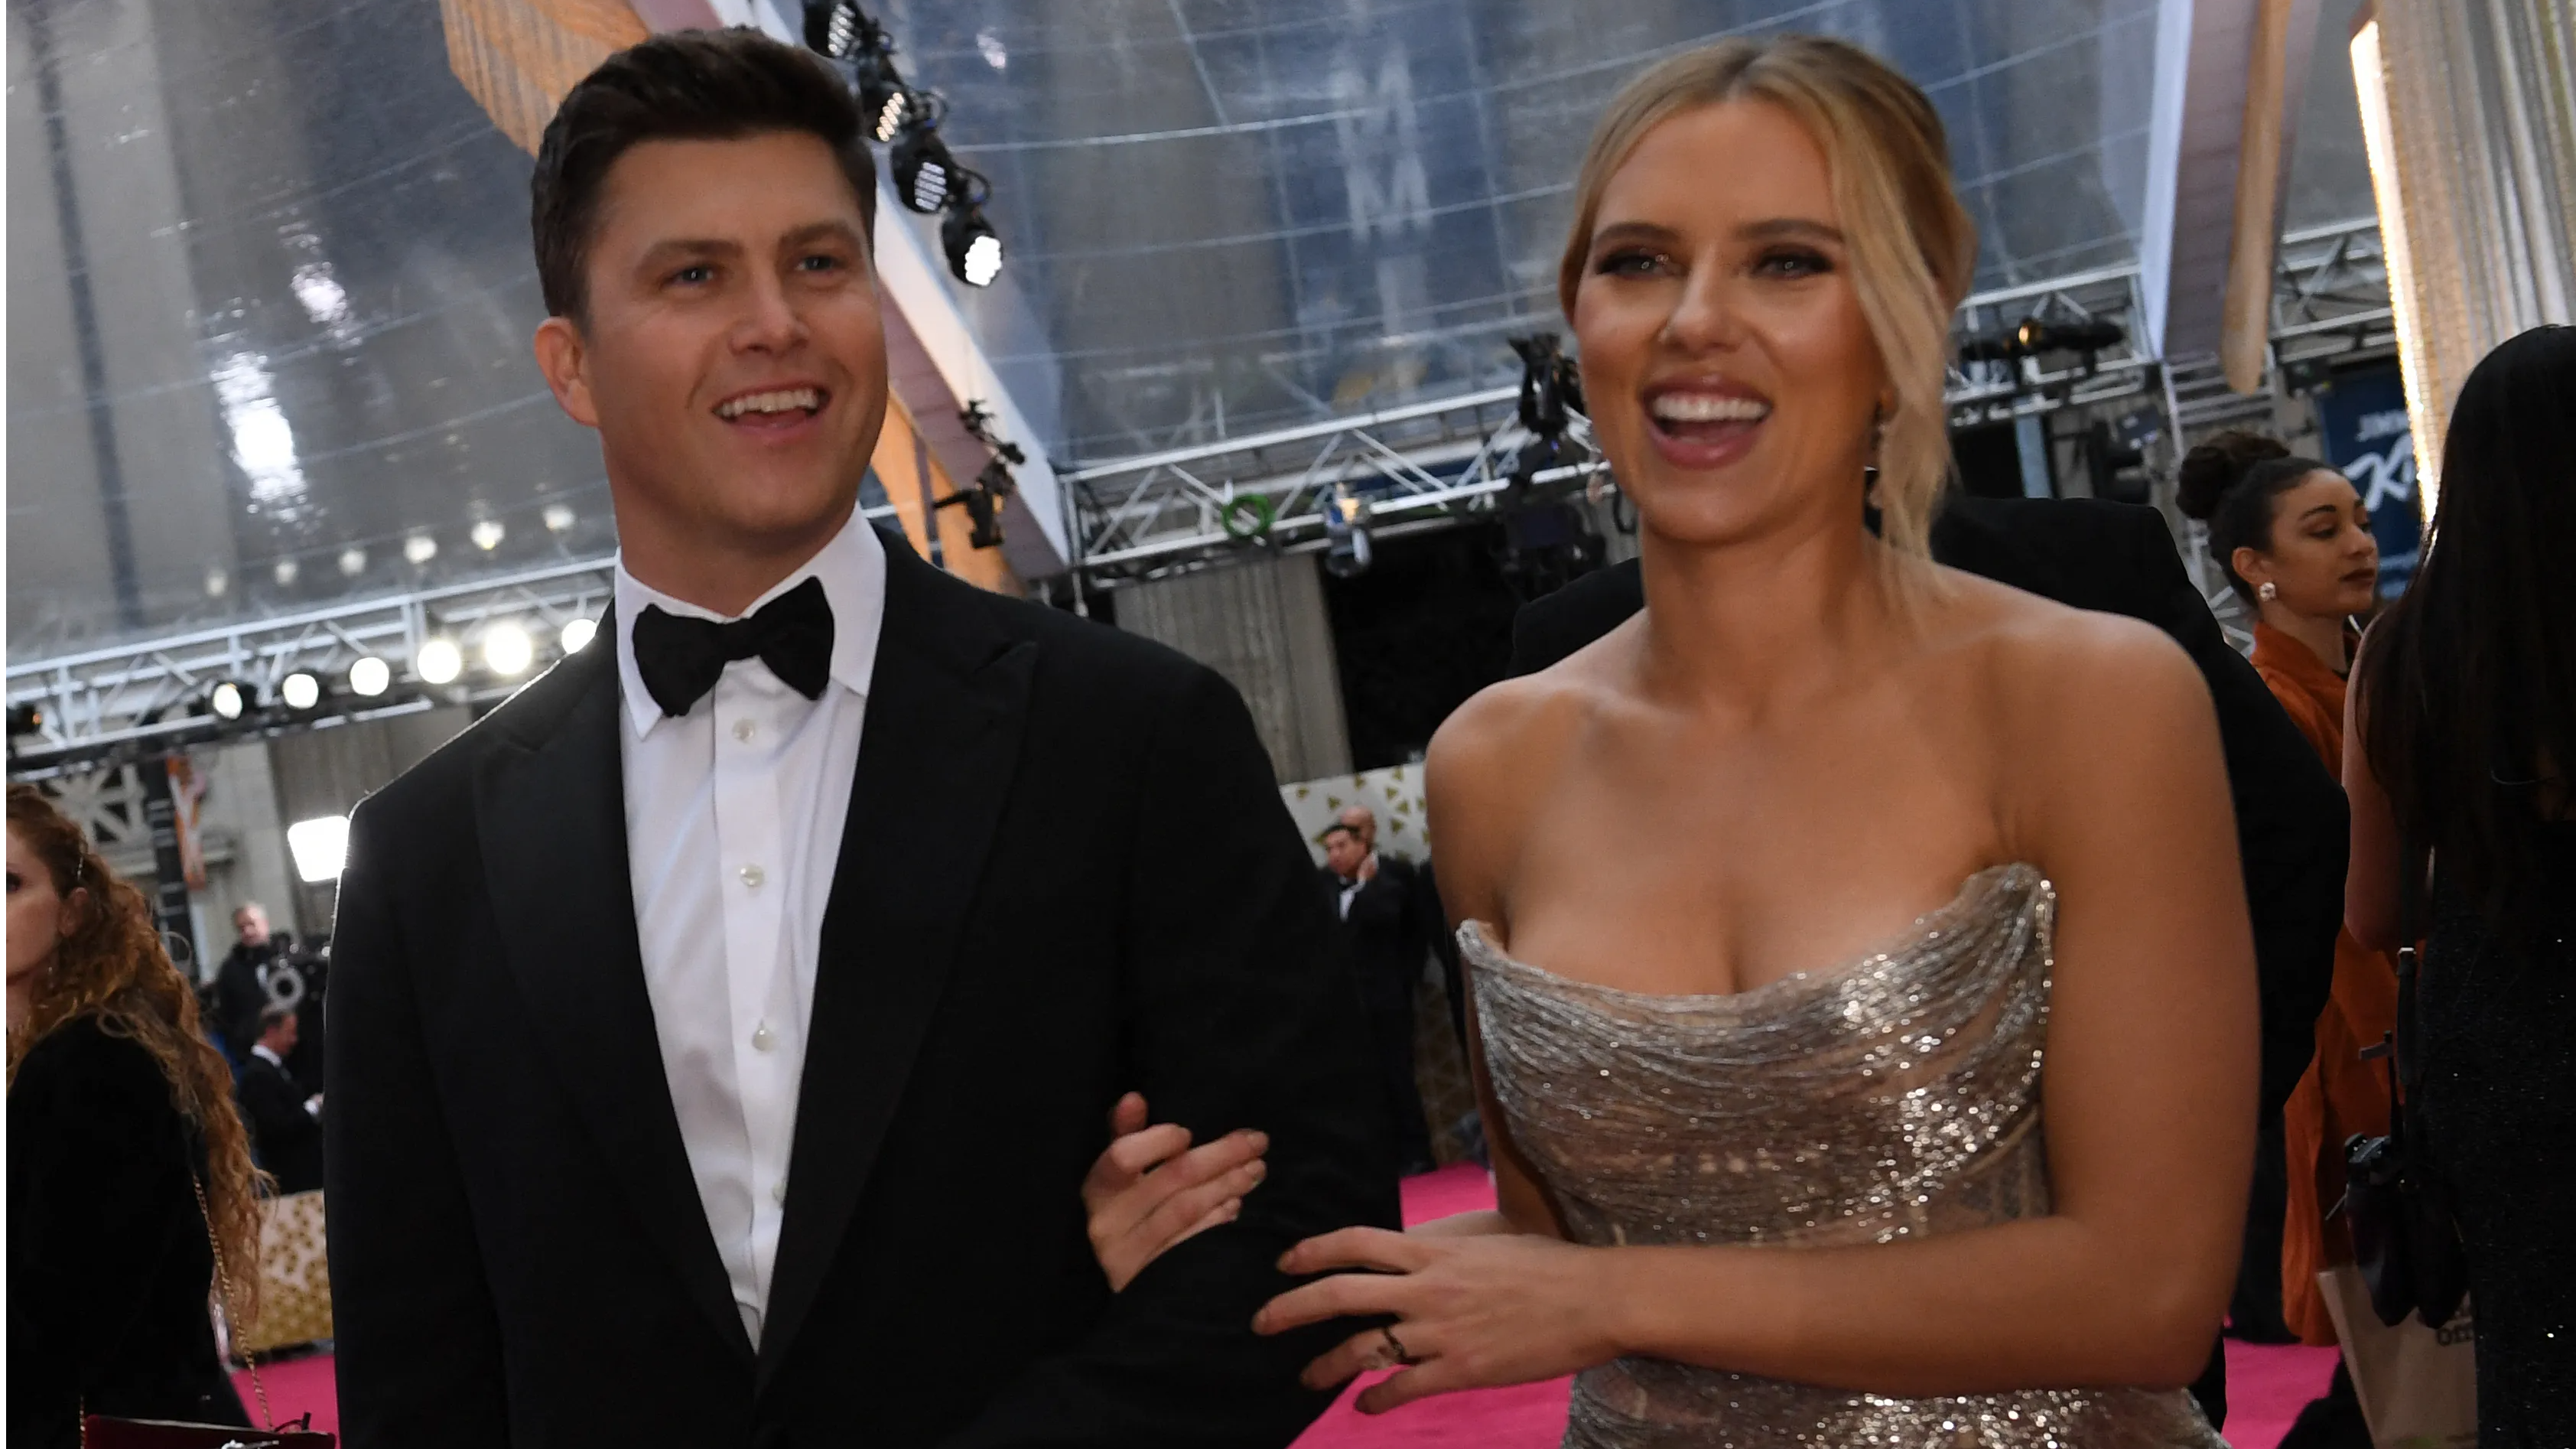 Hollywood star Scarlett Johansson expecting first child with Colin Jost